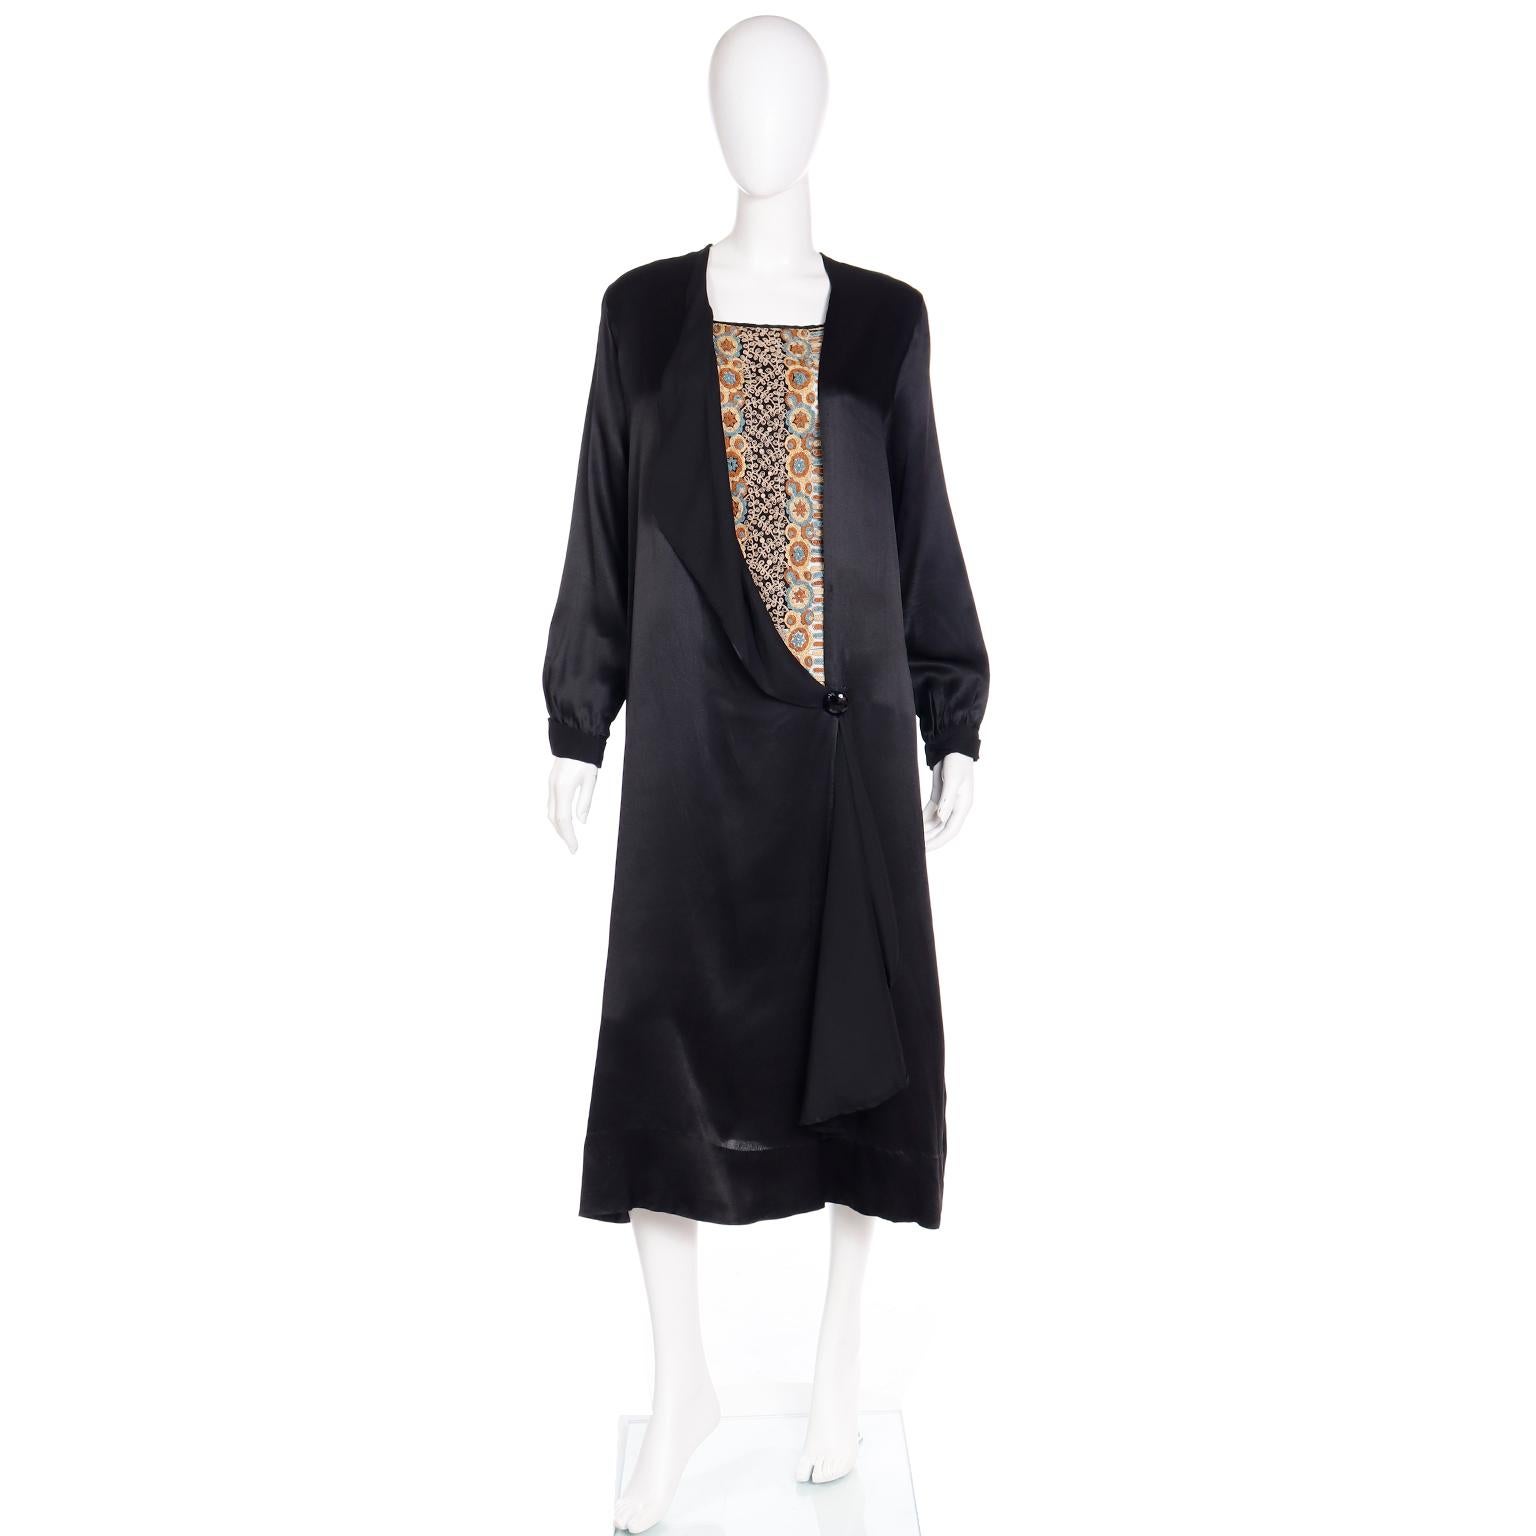 This true vintage 1920's black silk dress is accented with intricate fine hand embroidery including beautiful couching. This beautiful detail makes this dress so special. The embroidery creates a lovely floral pattern in a variety of hues including